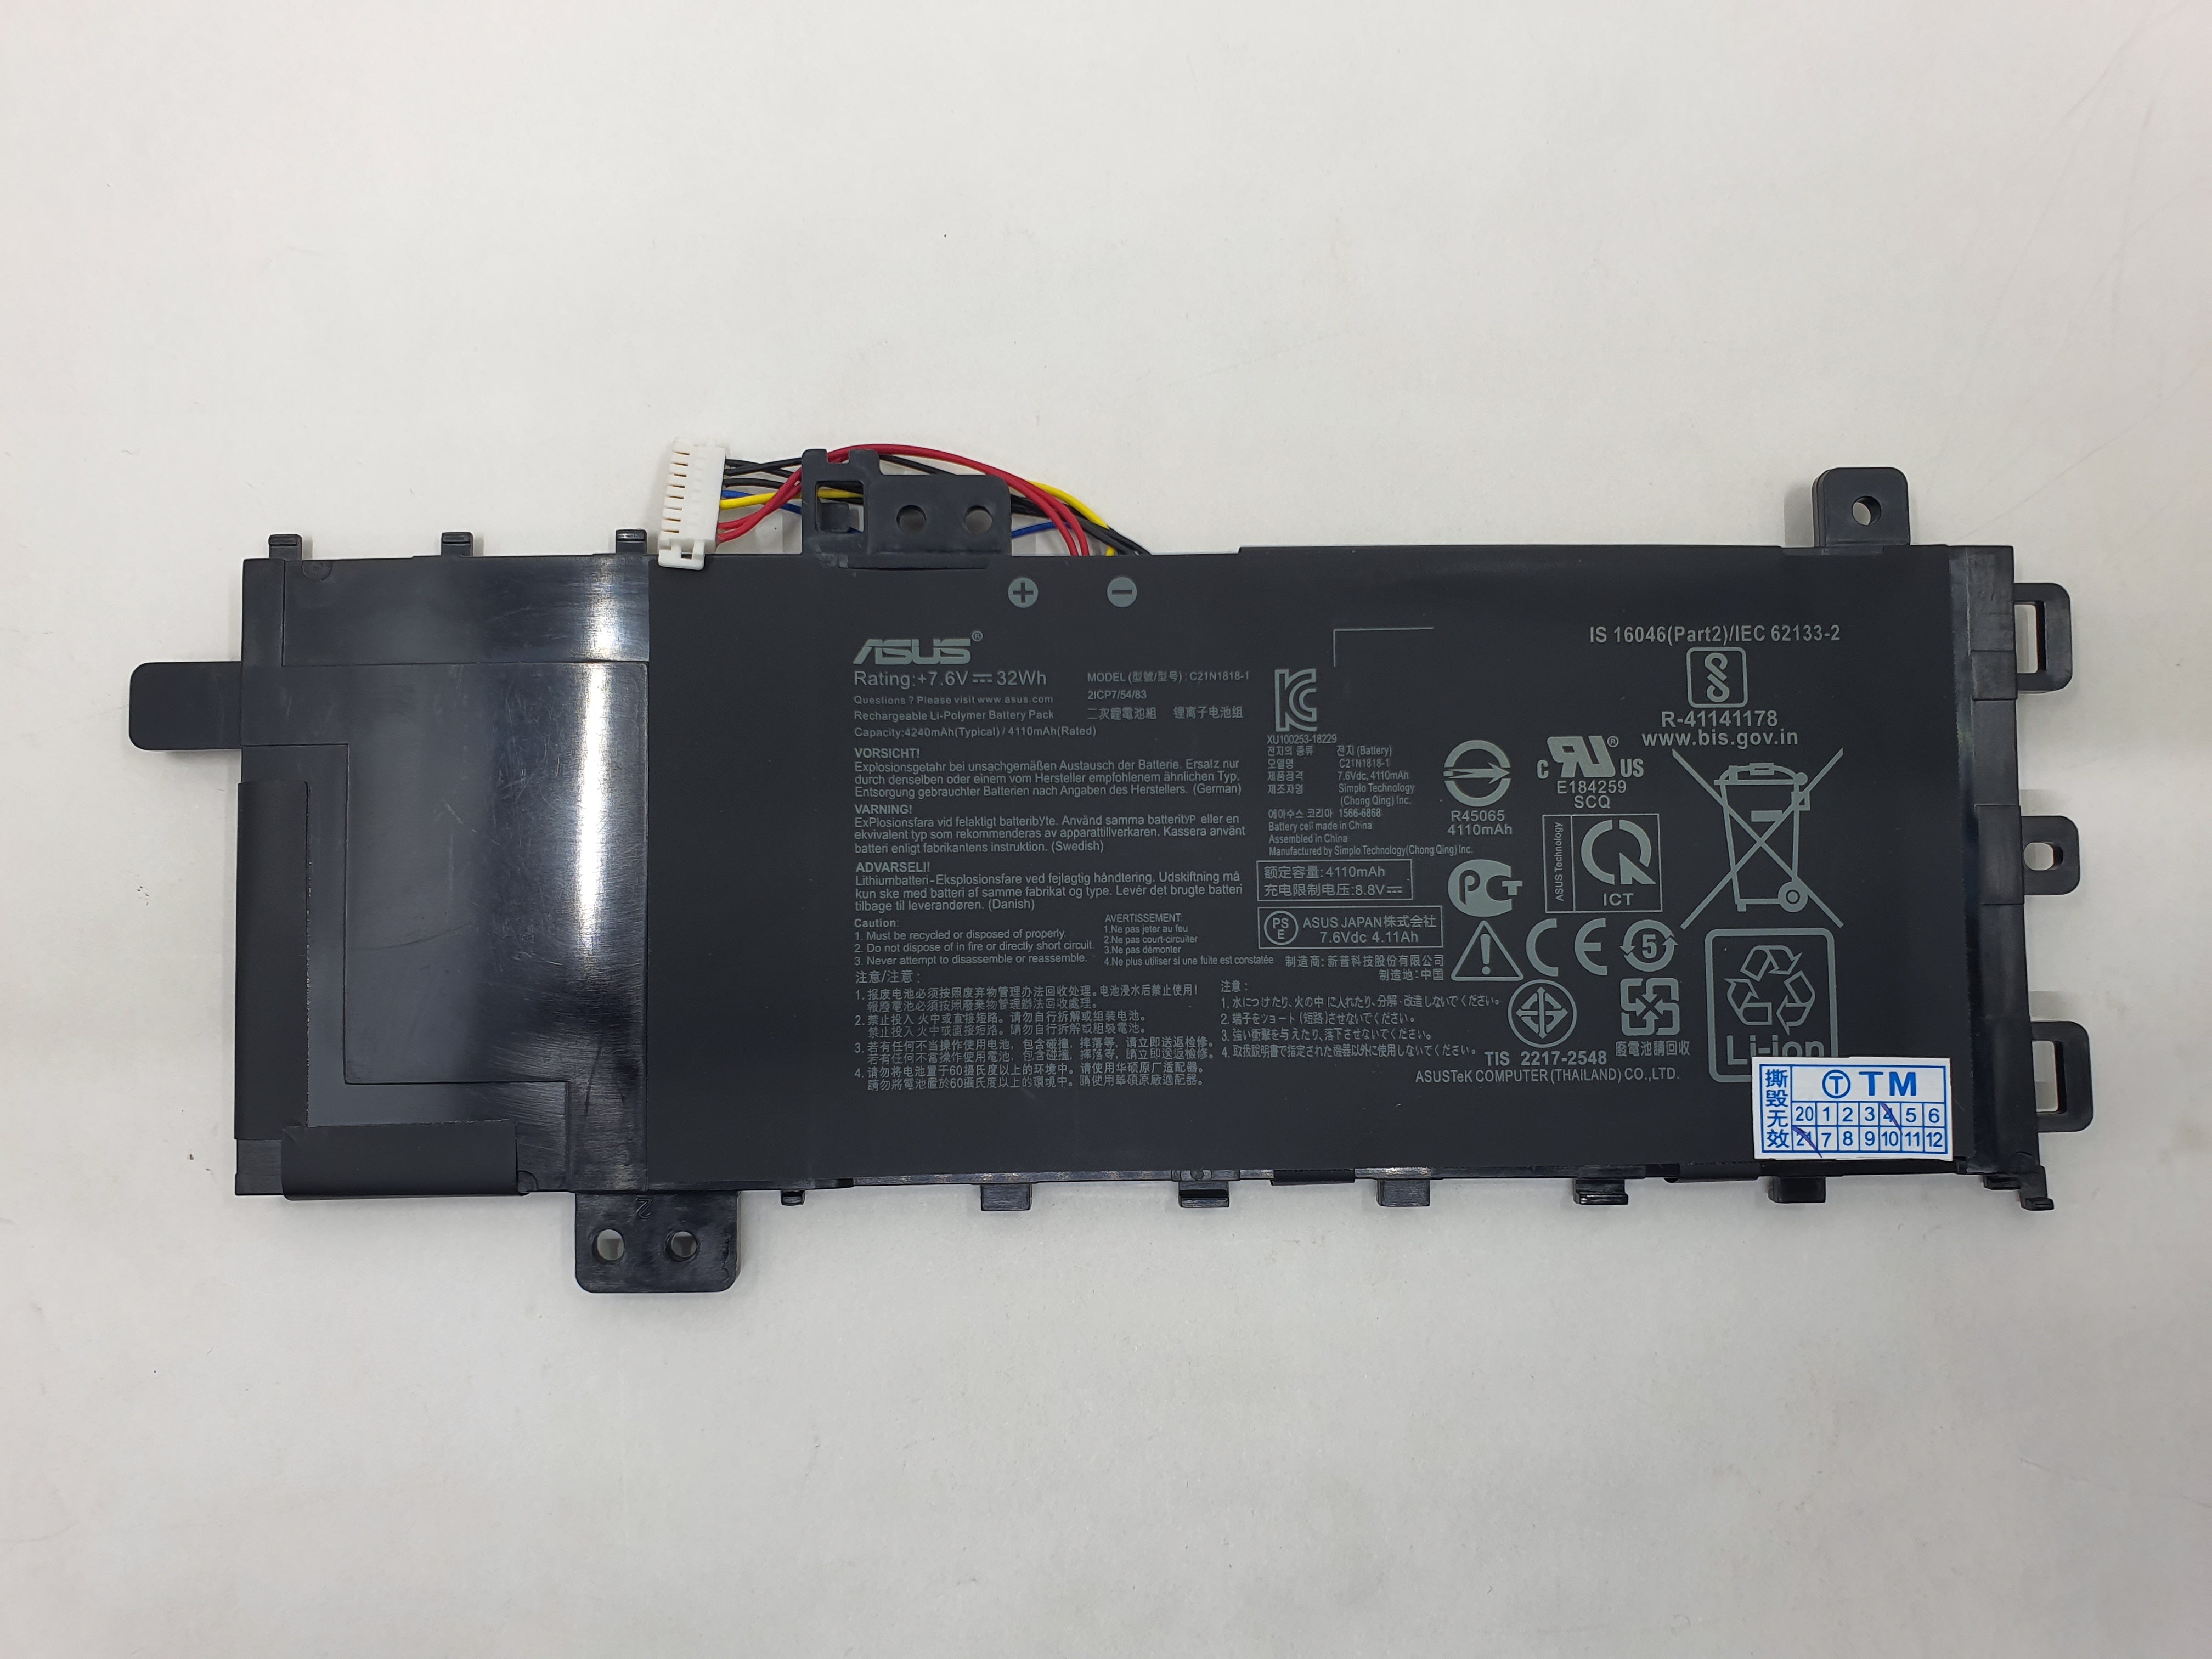 Asus Battery X509JA A1 for Replacement - Asus X509JA